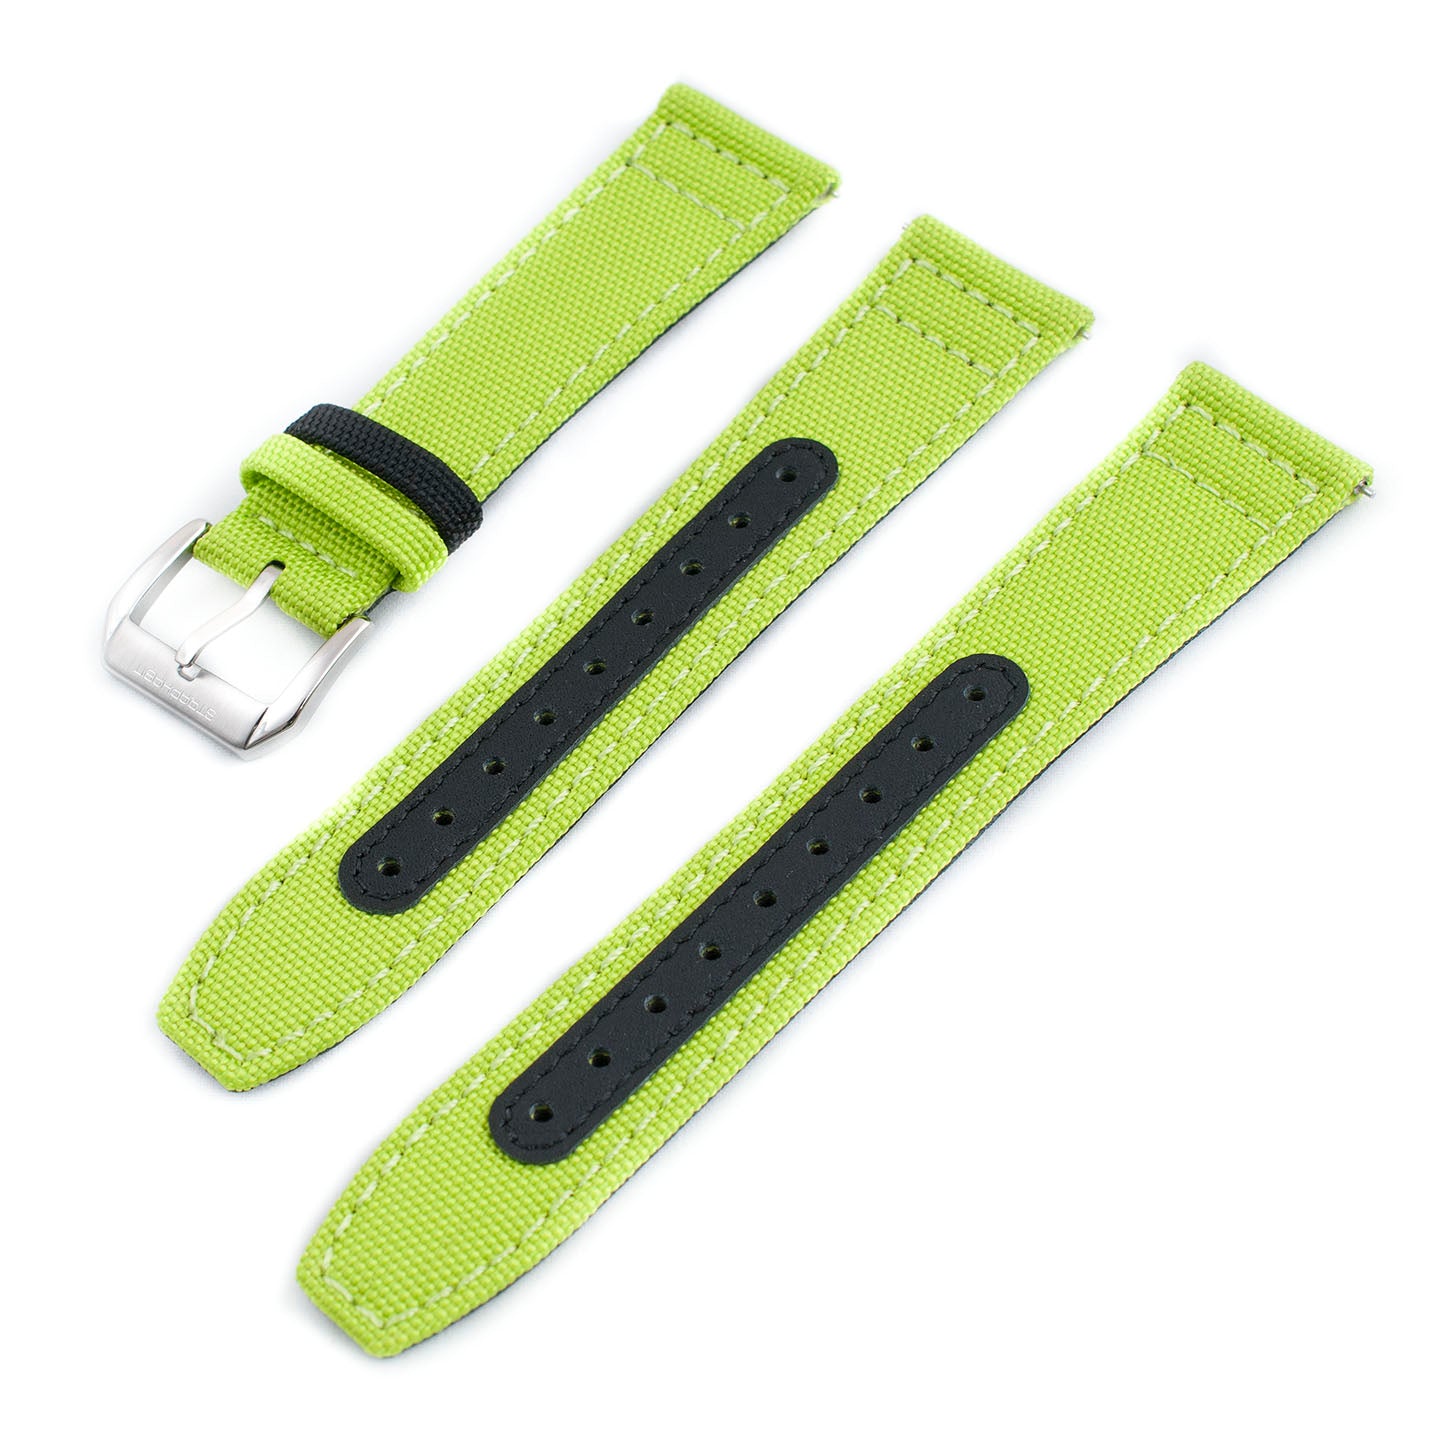 Premium Sailcloth Colorway Quick Release Watch Strap band replacement 19mm, 20mm, 21mm, 22mm for large wrists and small wrists, for men and women, unisex acid bright yellow brain green antifreeze